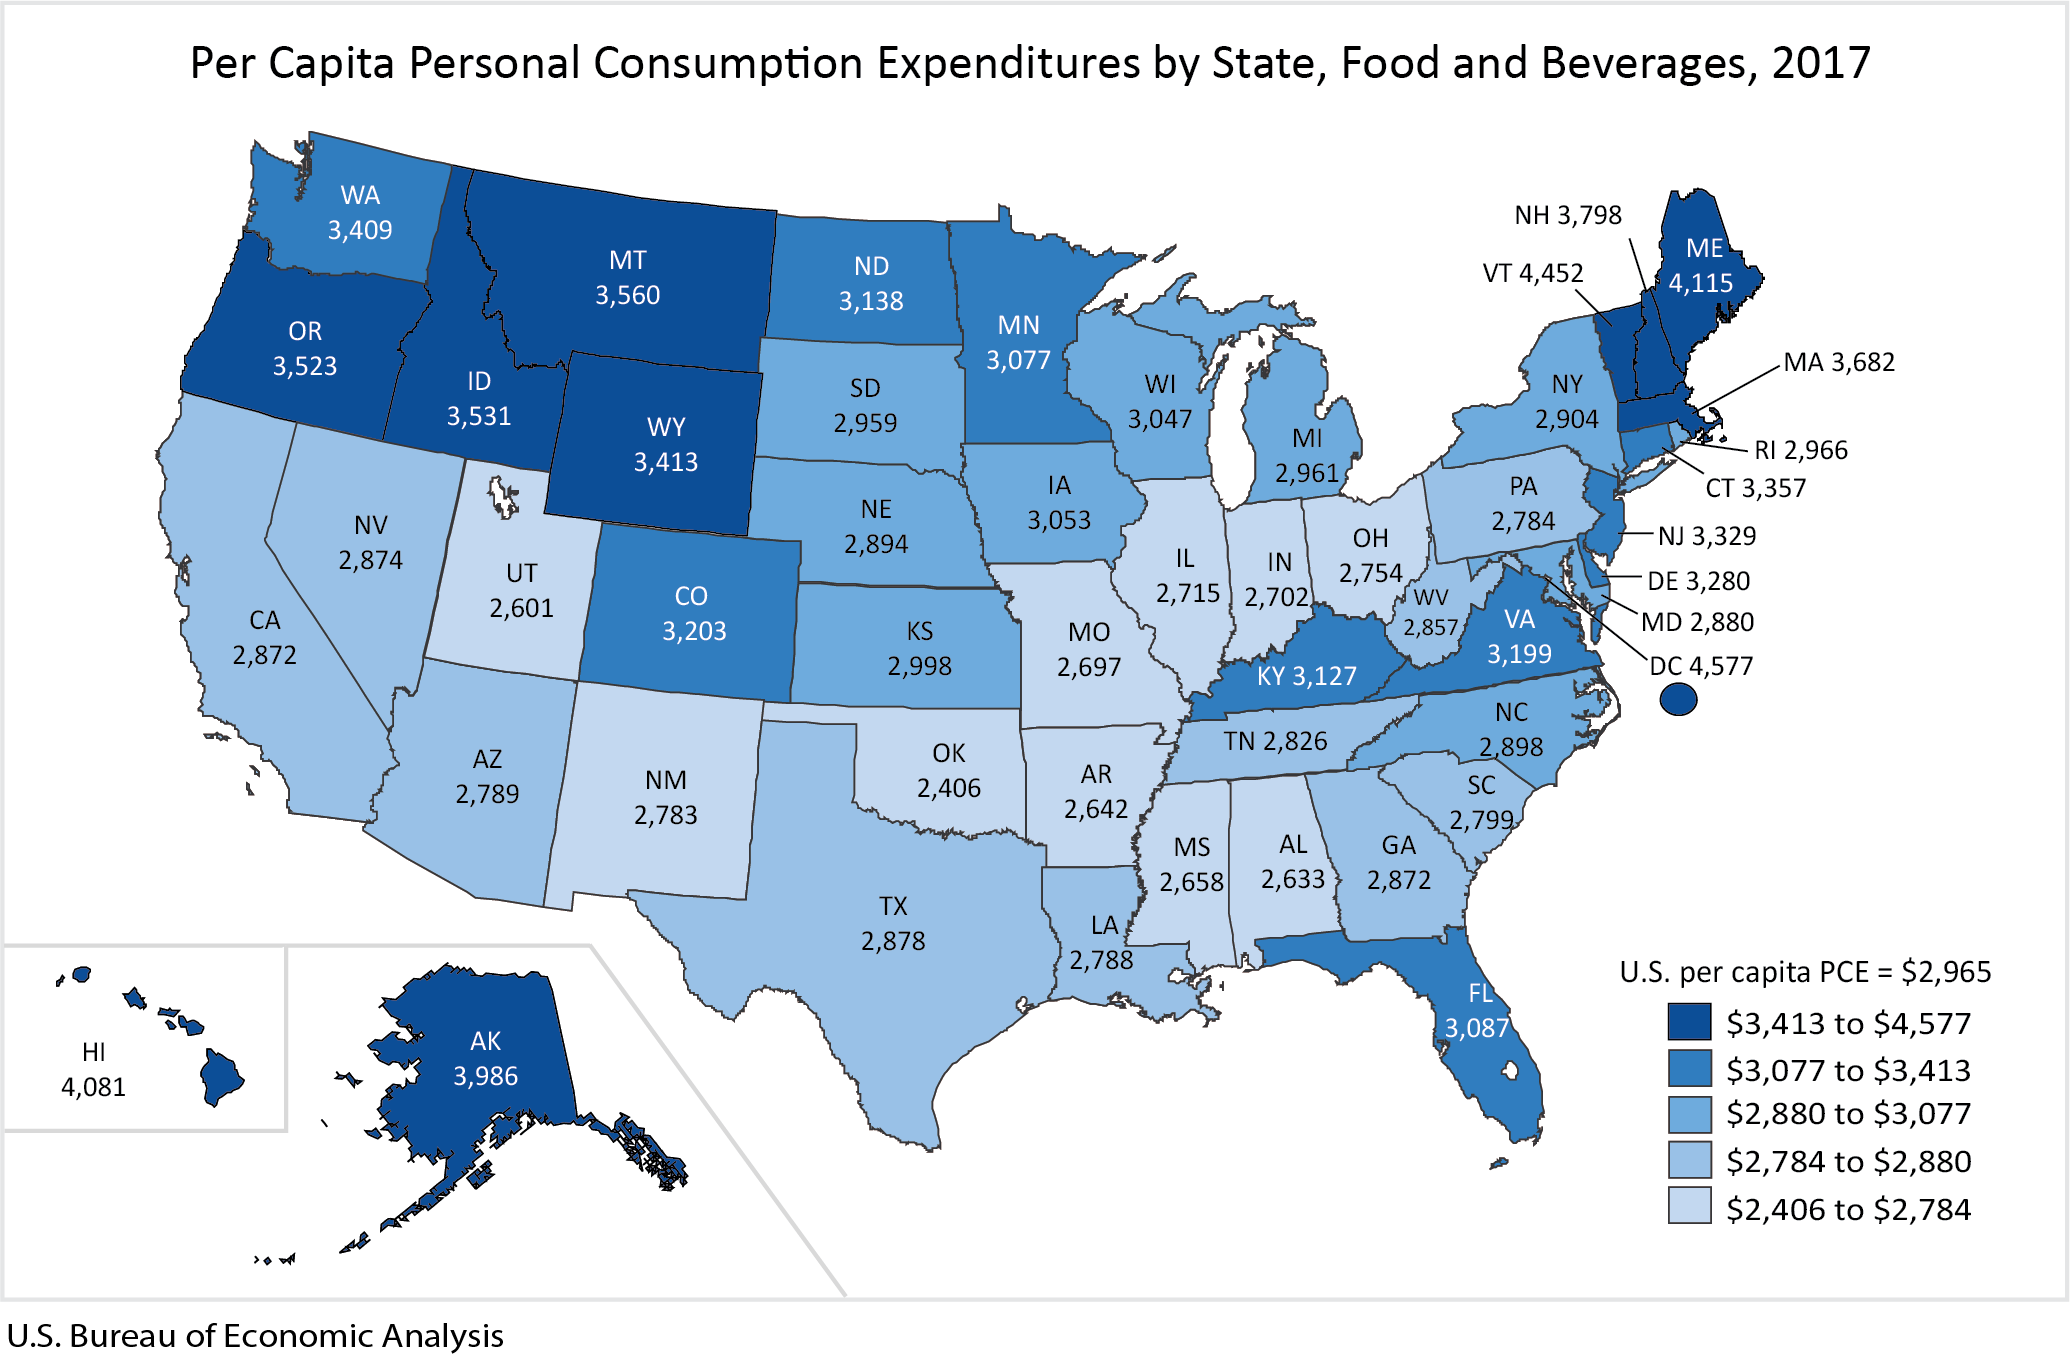 Per Capita Personal Consumption Expenditures by State, Food and Beverages, 2017